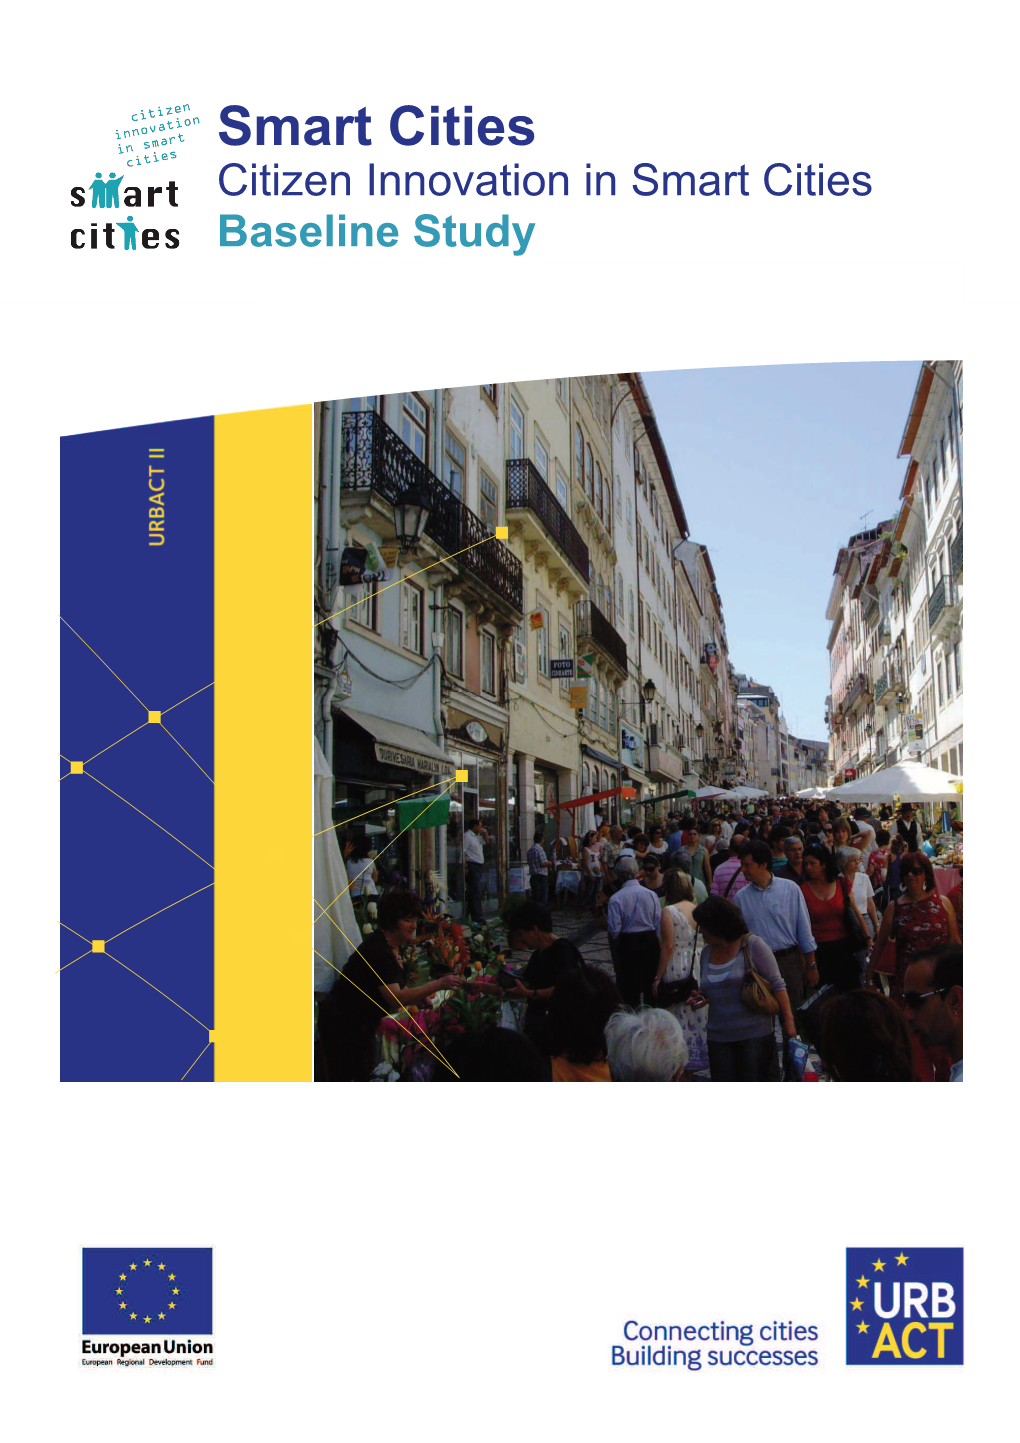 Smart Cities Citizen Innovation in Smart Cities Baseline Study Baseline Study » the State of the Art (And Partner Profiles)